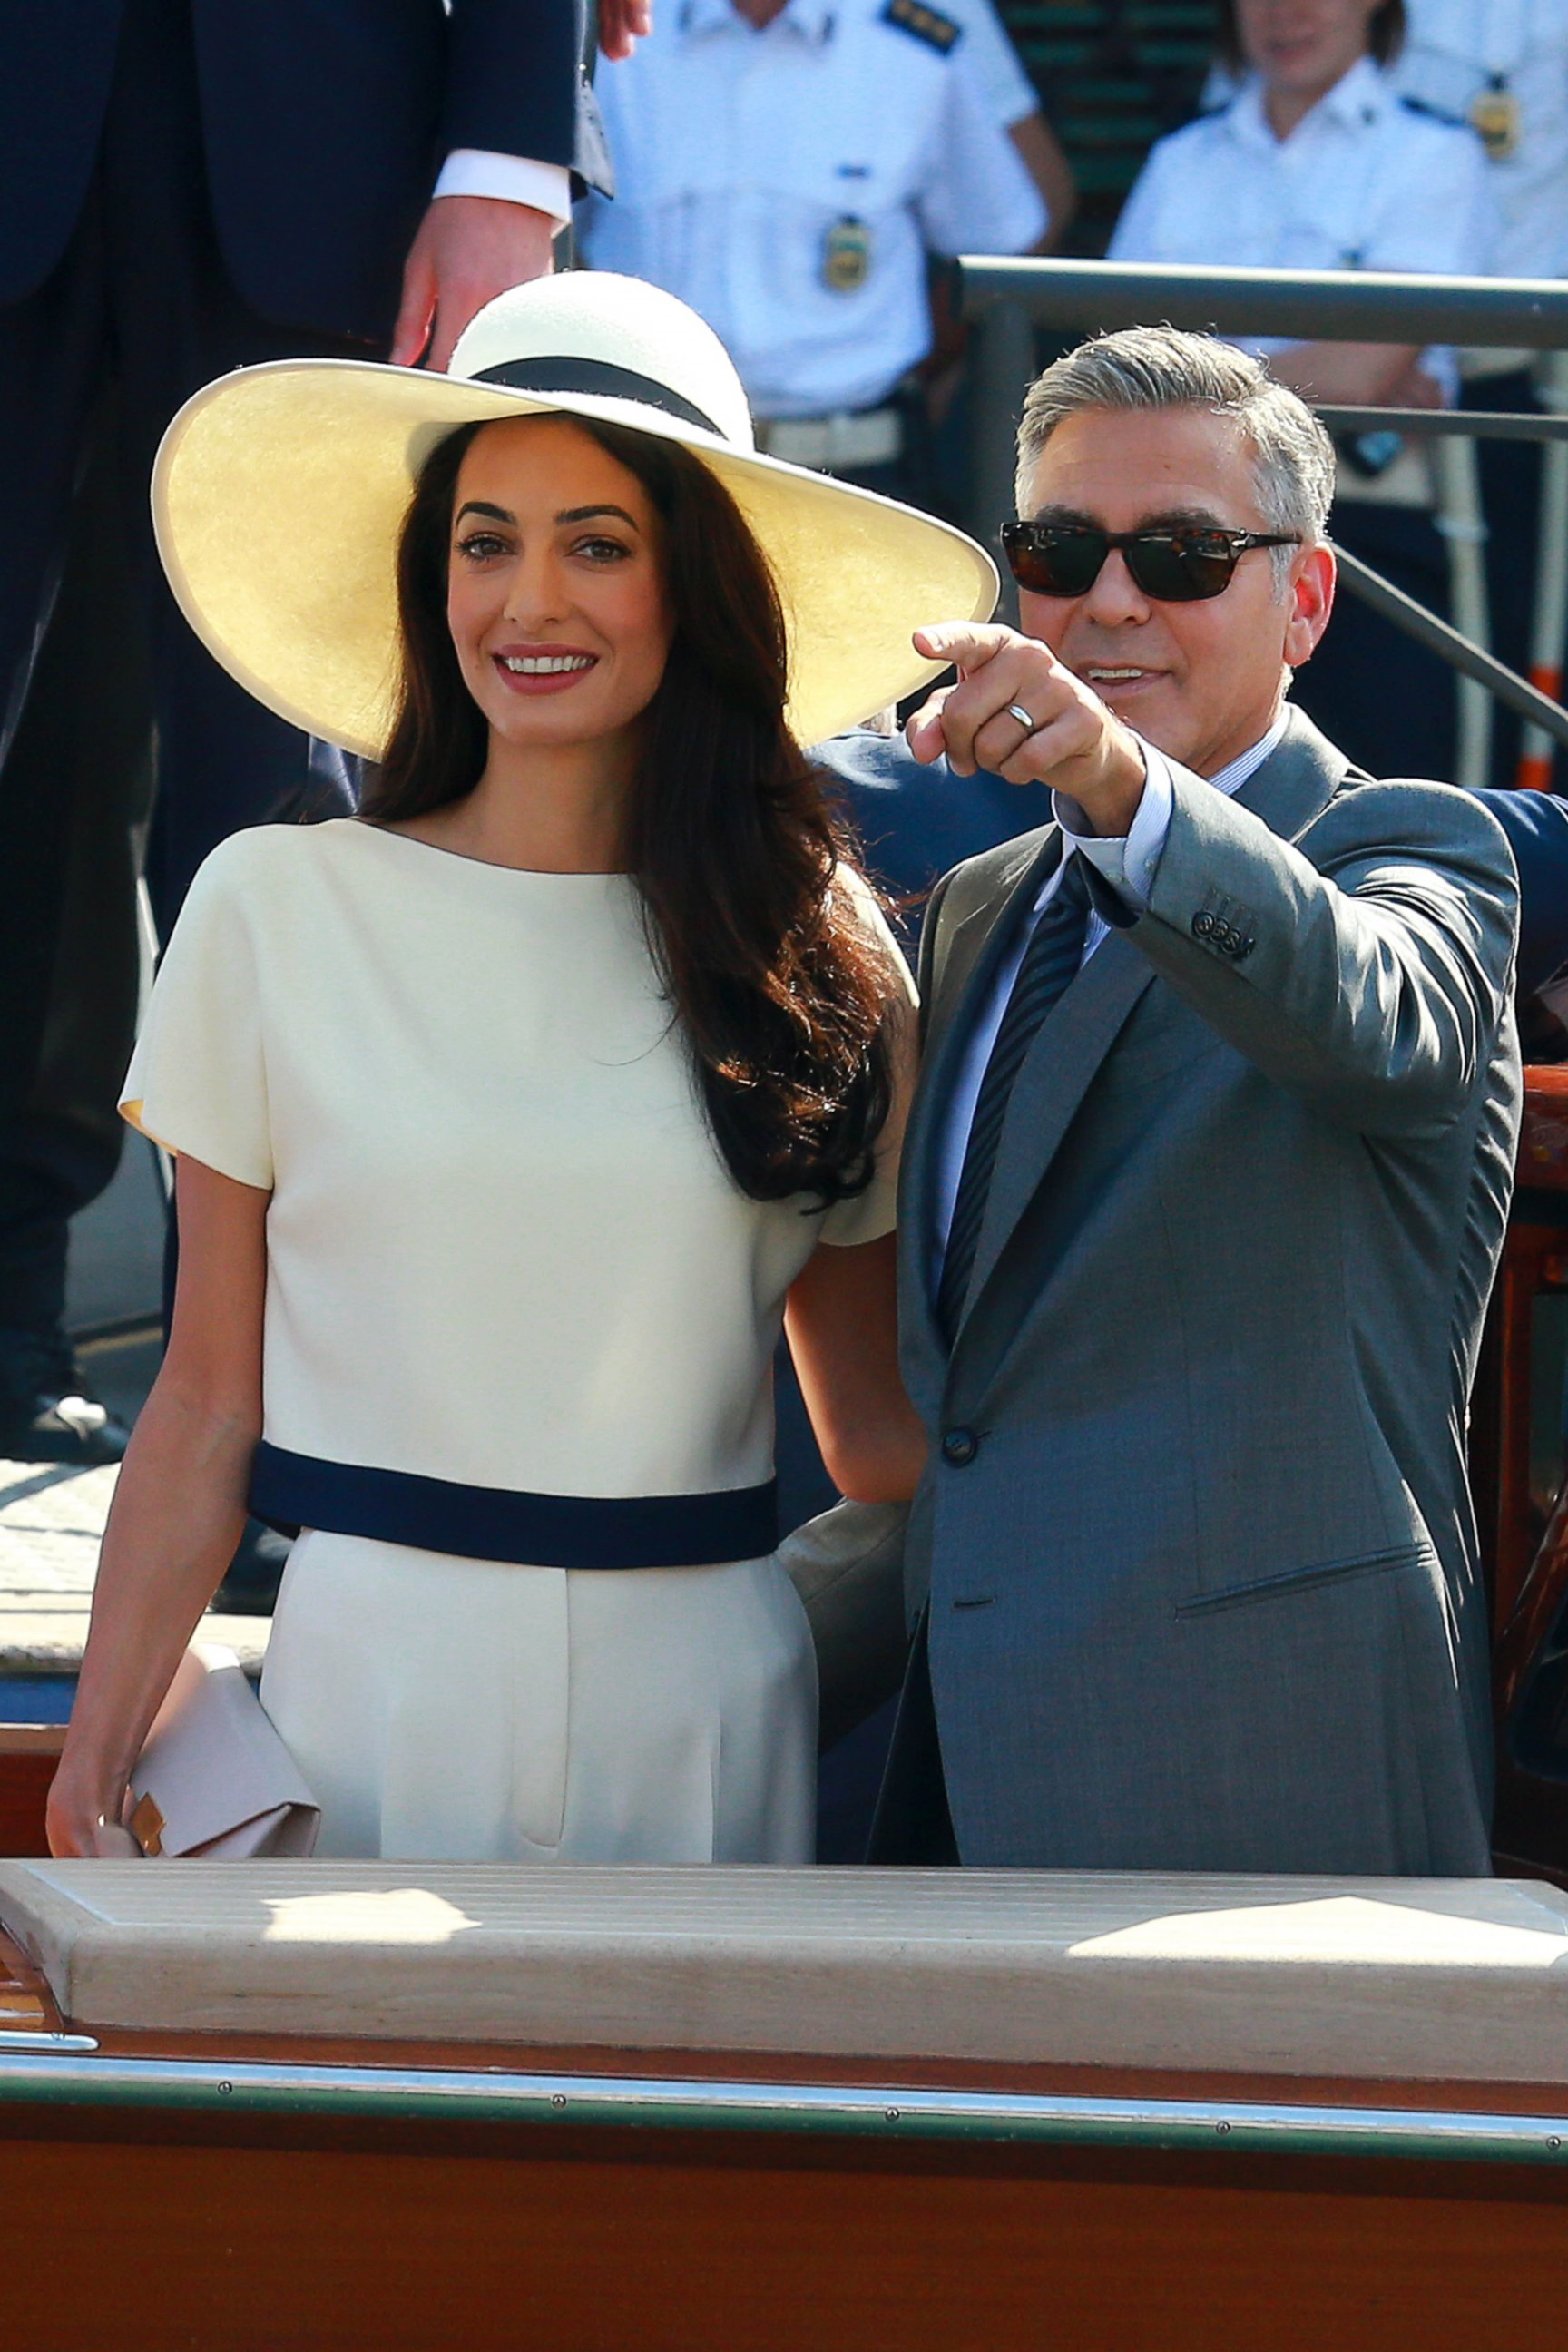 PHOTO: George Clooney and Amal Alamuddin are seen at Canal Grande on September 29, 2014 in Venice, Italy.